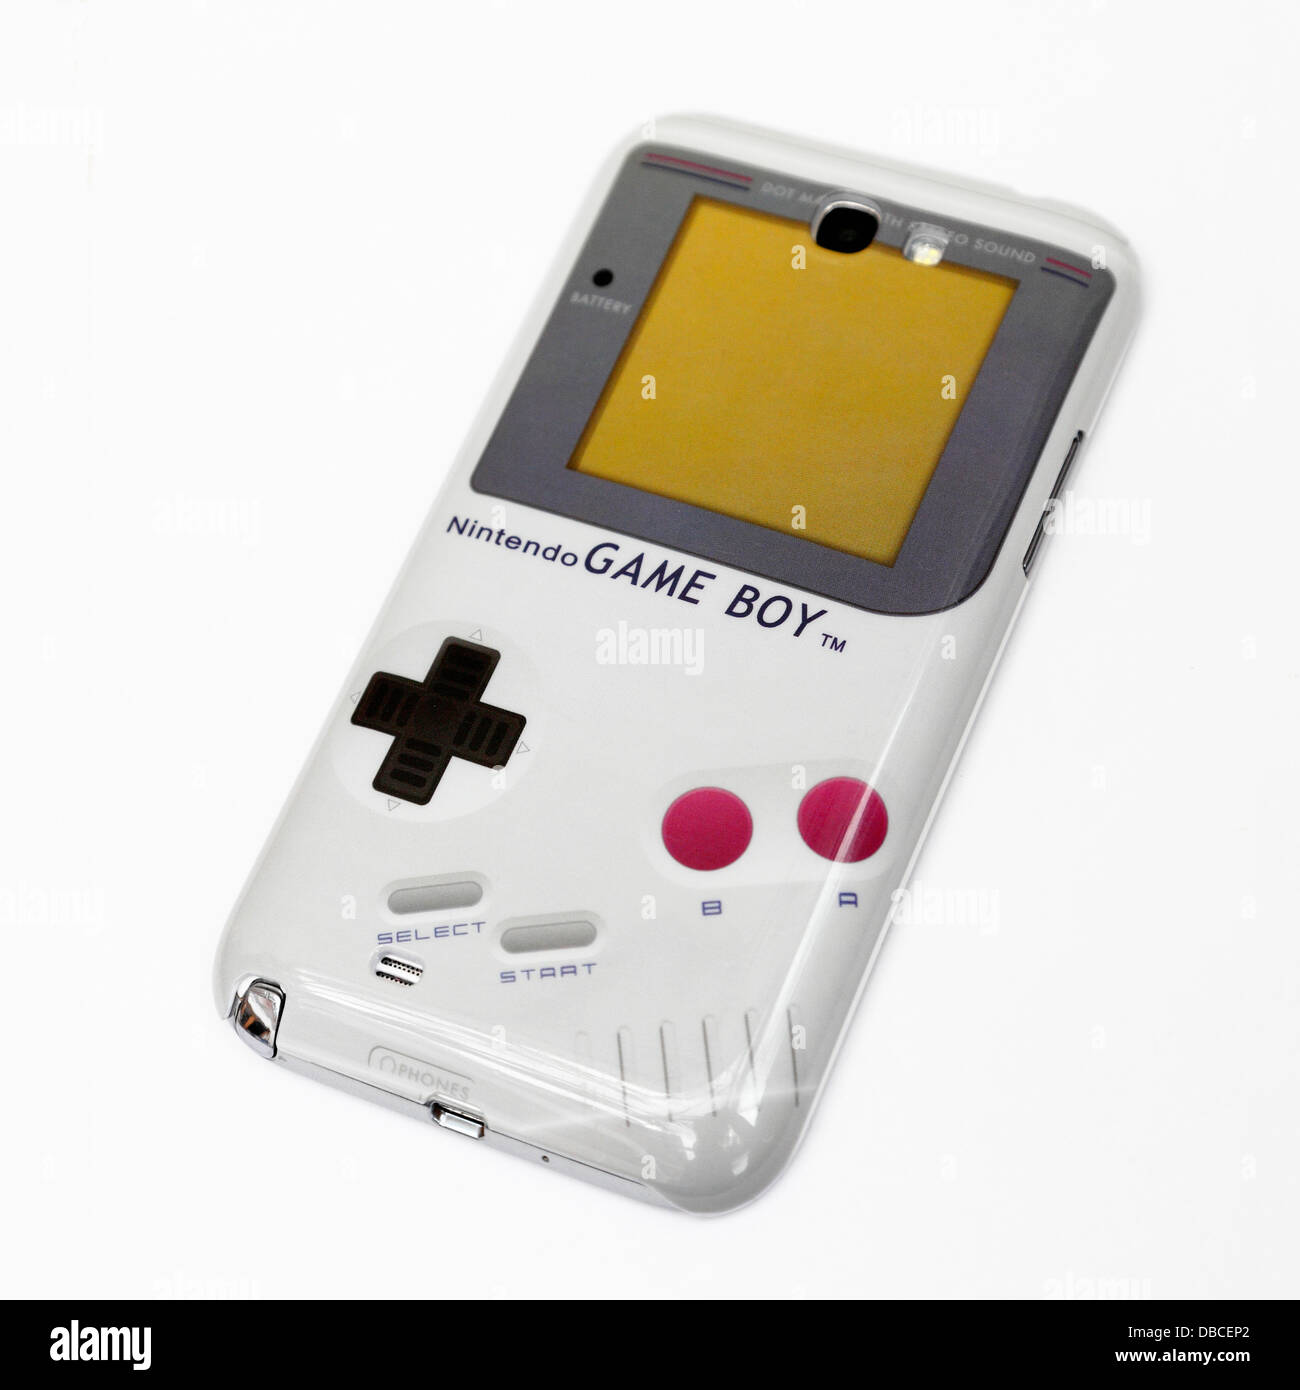 Samsung smart phone with a novelty skin cover imitating a Game Boy classic retro mobile gaming device Stock Photo